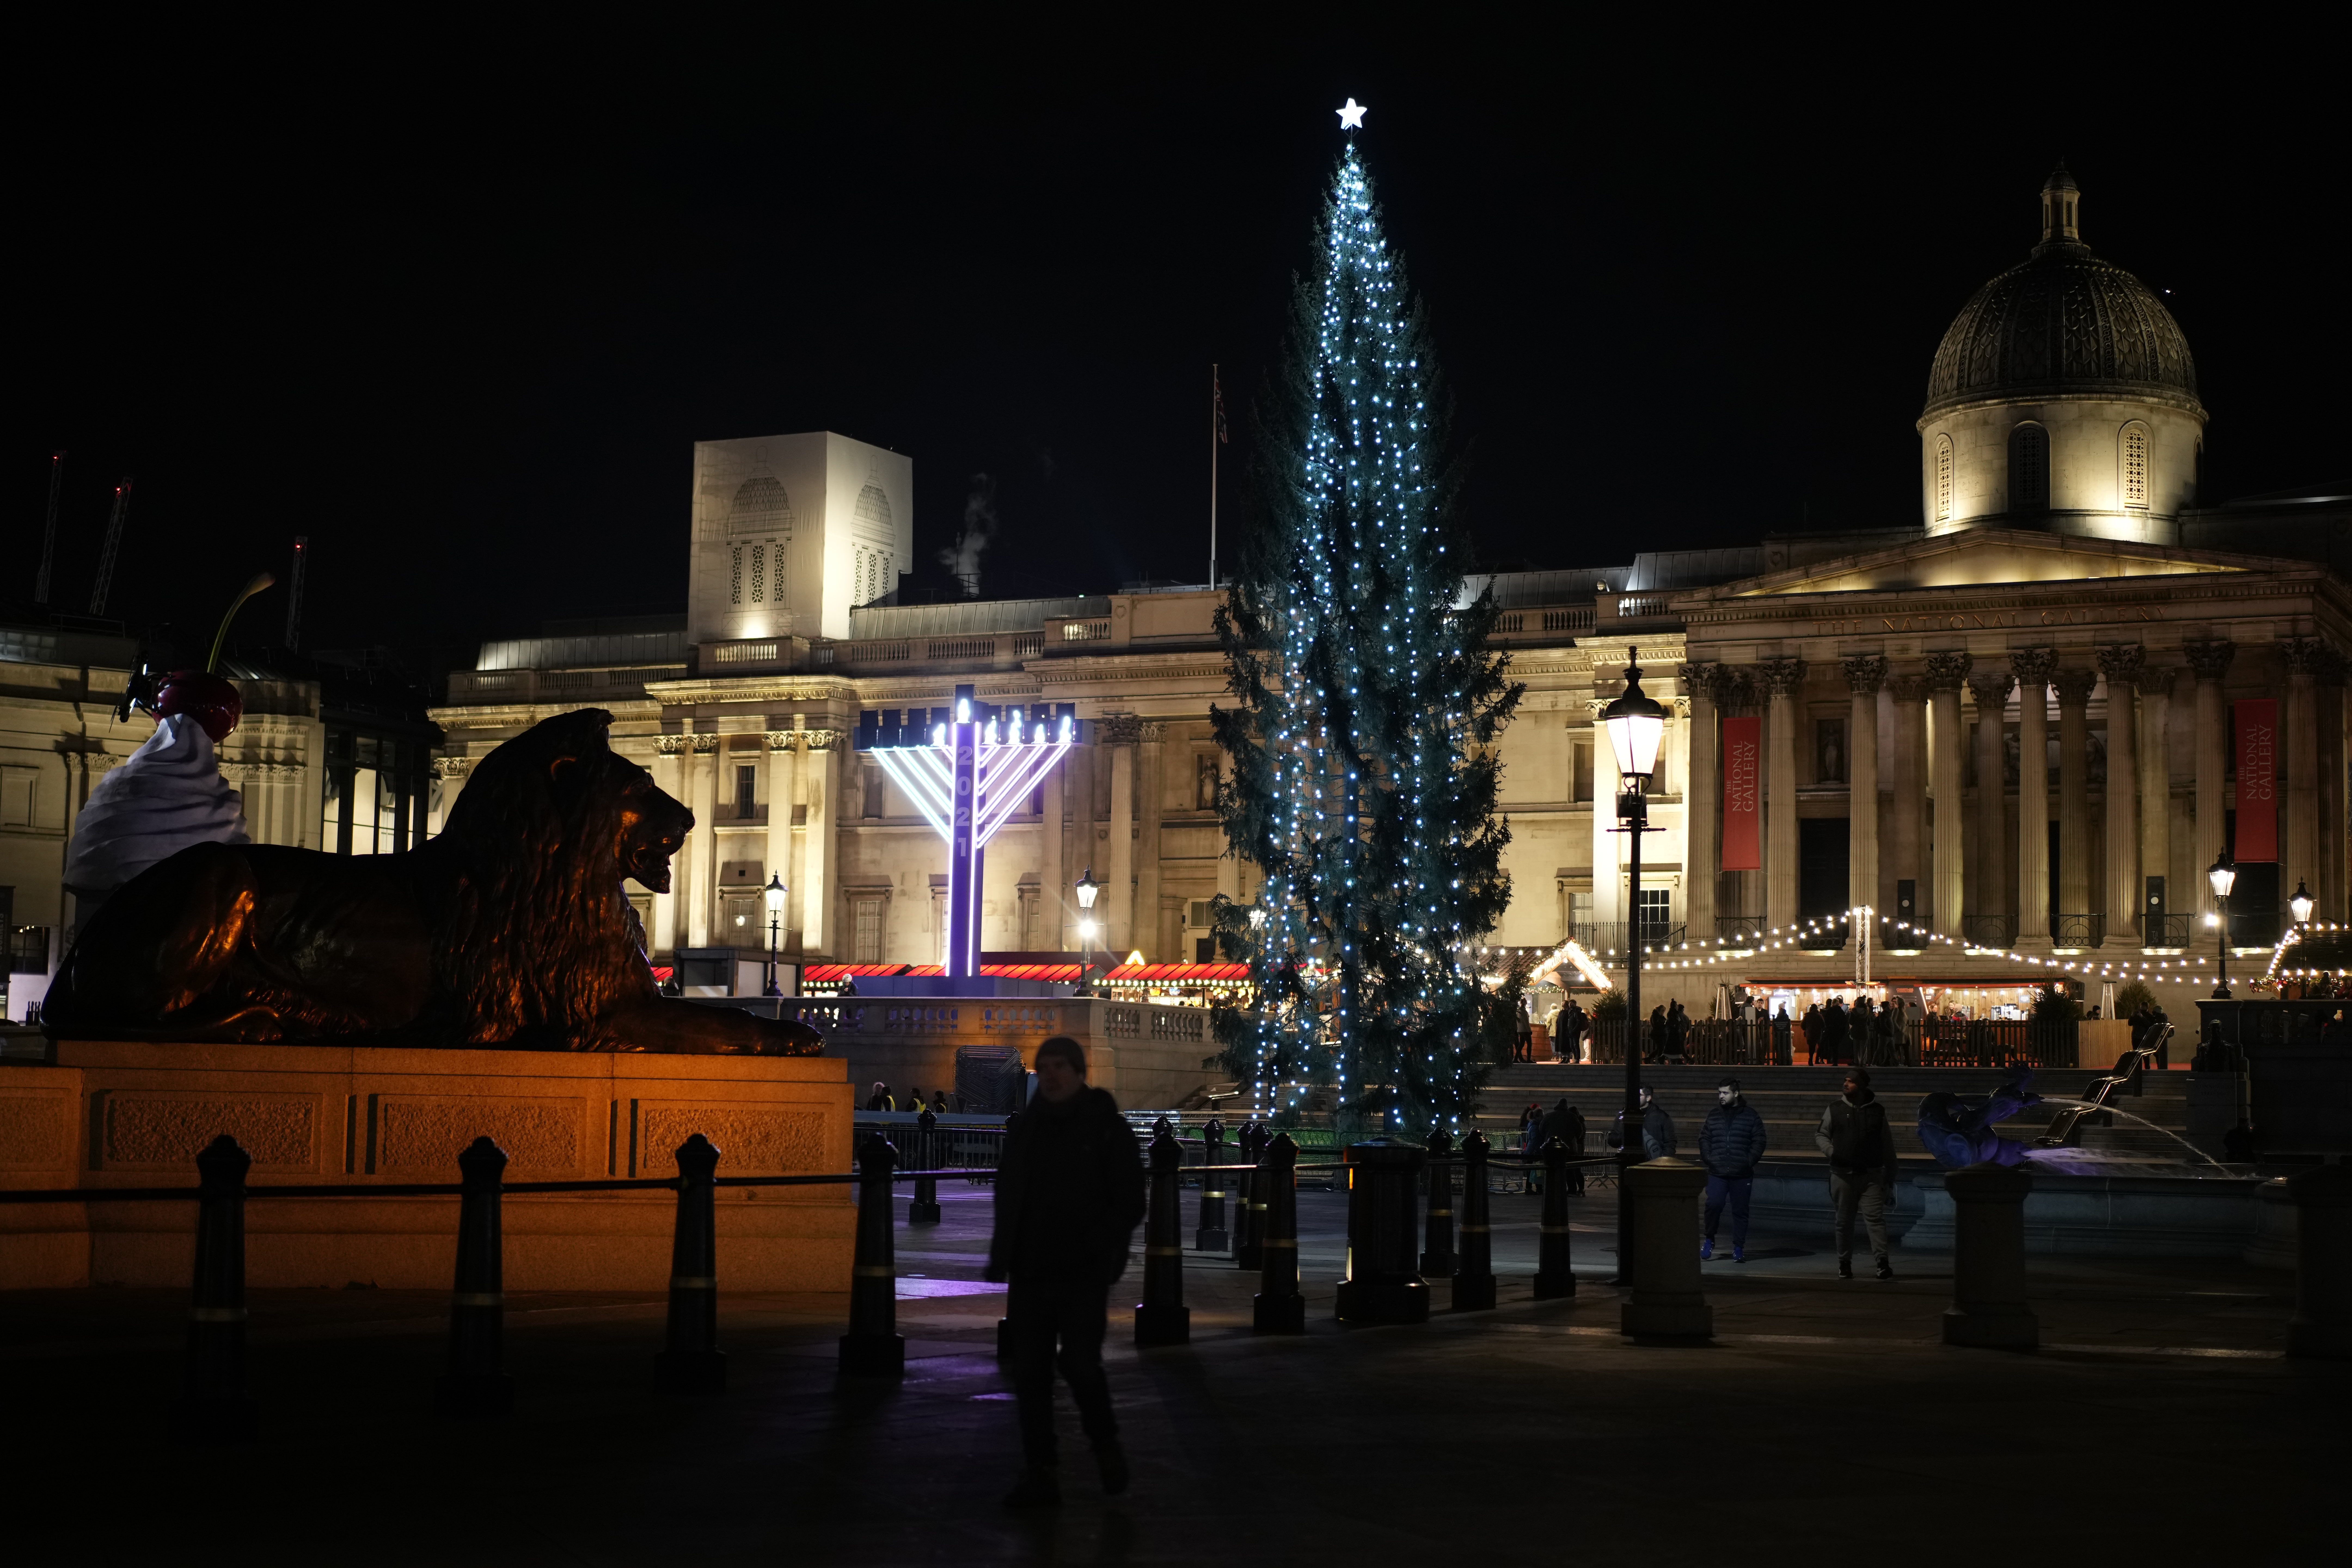 The Norwegian Christmas tree stands with its lights turned on after a lighting ceremony in Trafalgar Square, in London, Thursday, Dec. 2, 2021. The Christmas tree is an annual gift from the city of Oslo to the people of Britain as a token of thanks for British support during their years of occupation in World War II. (AP Photo/Matt Dunham)